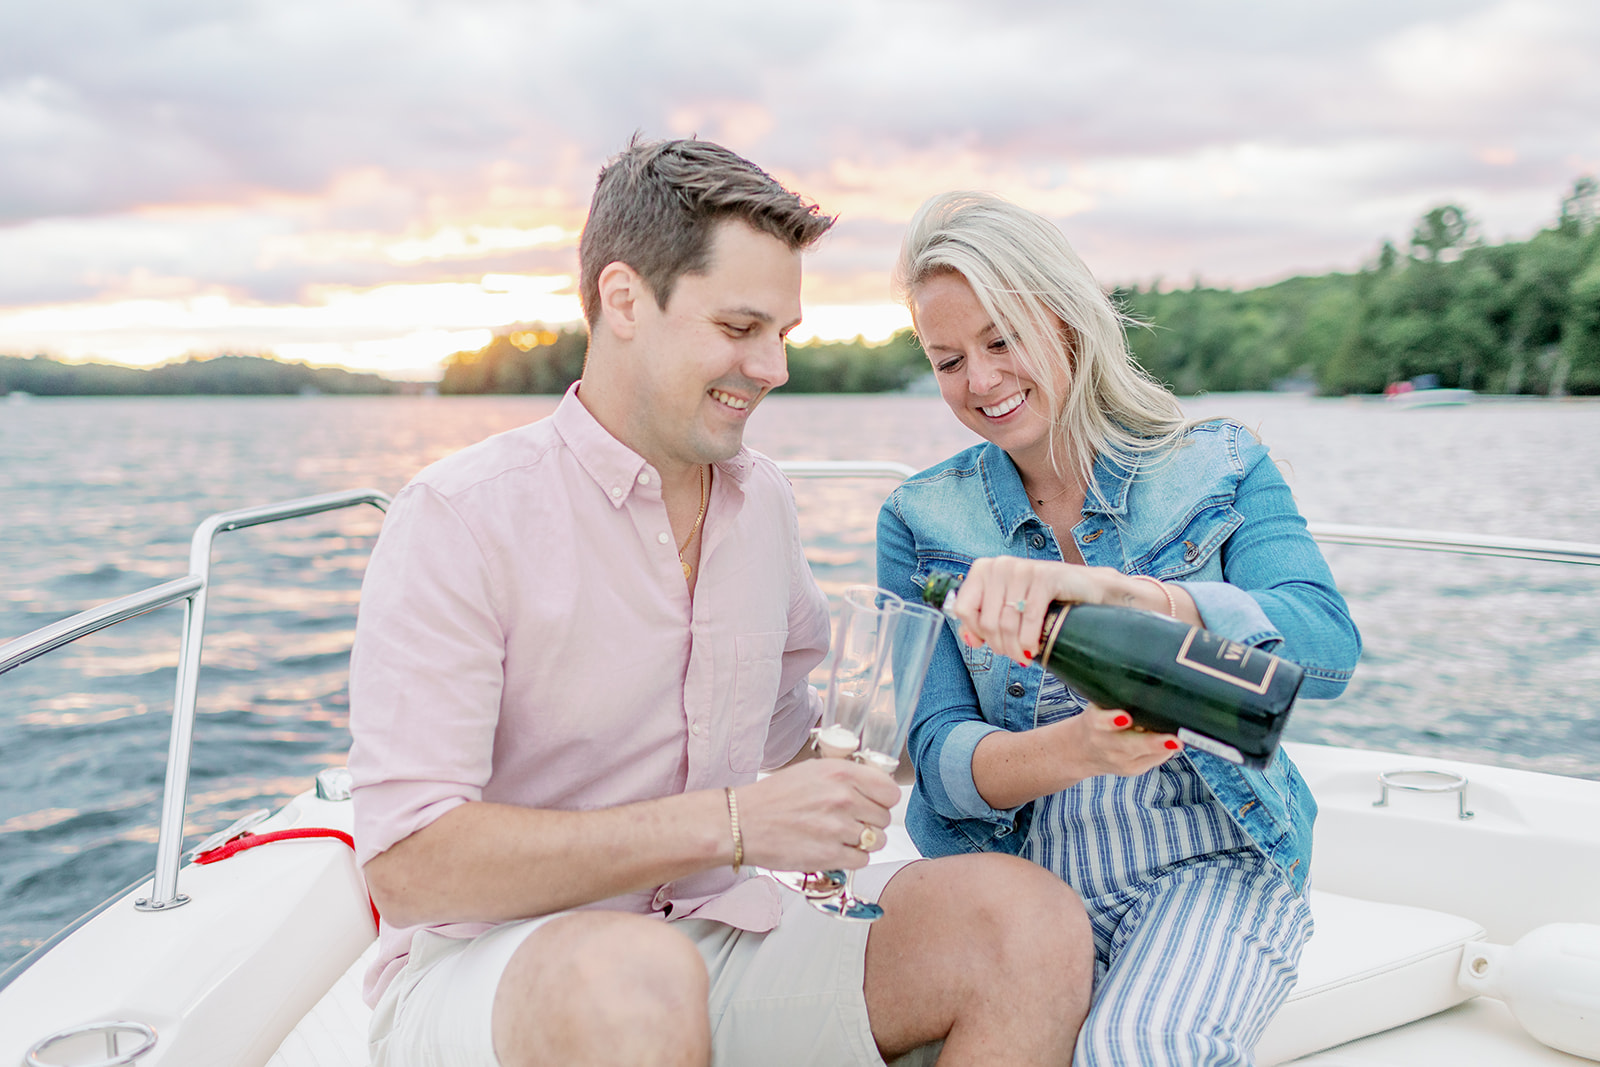 Couple pours champagne on boat during sunset engagement photoshoot 